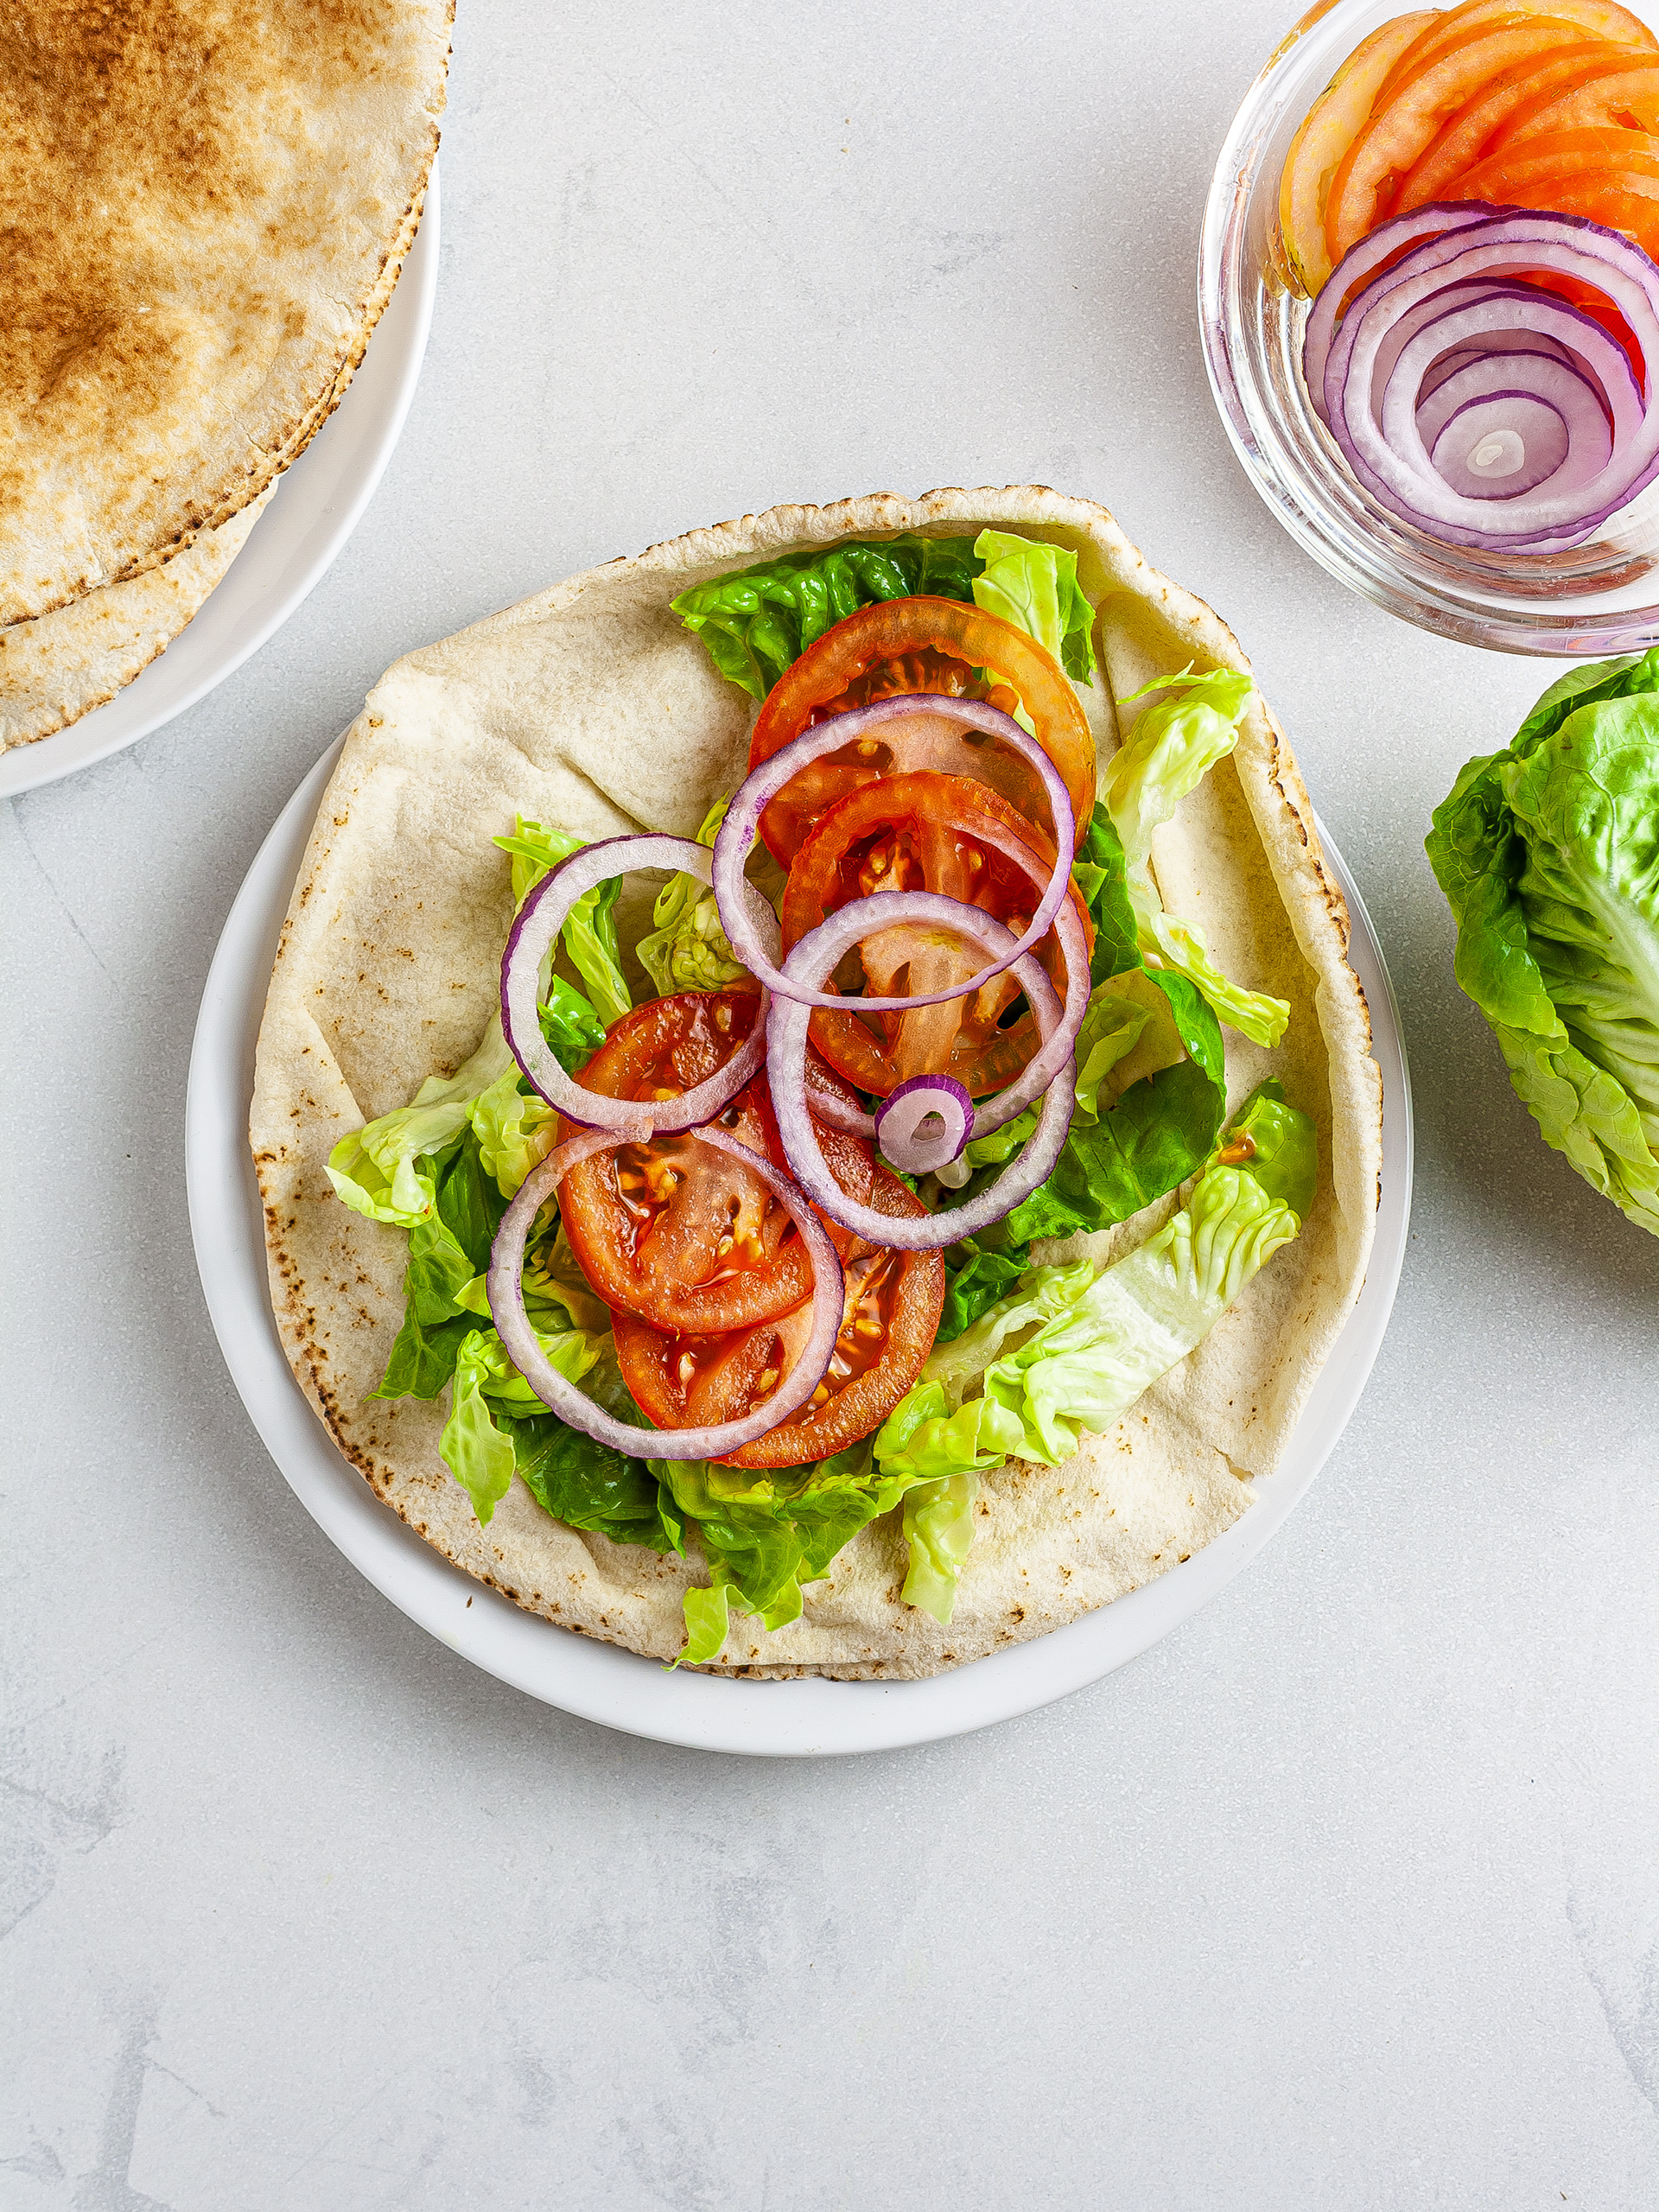 Kebab flatbread topped with salad